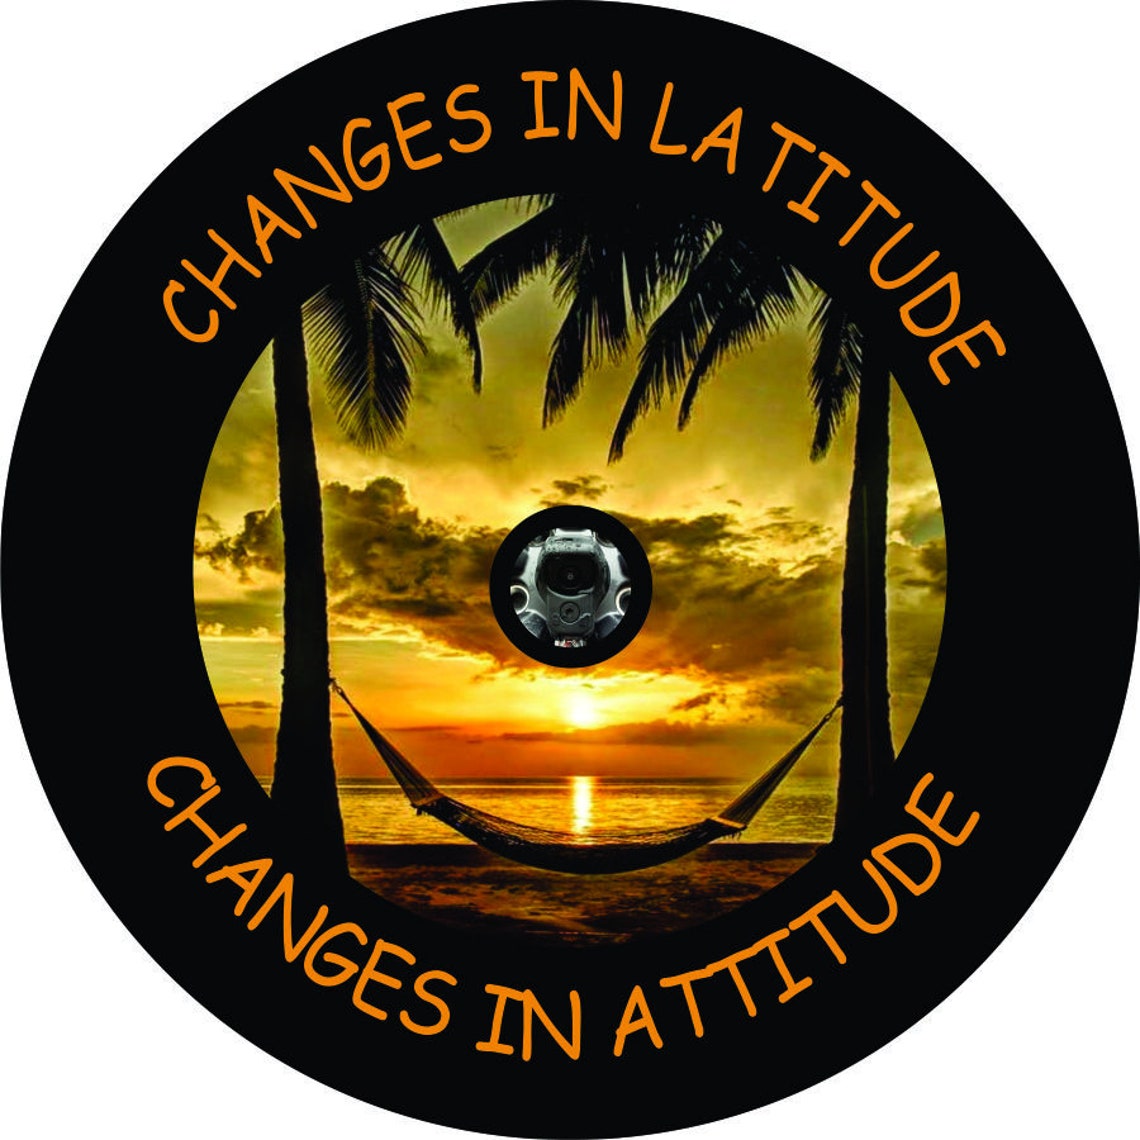 Changes in latitude changes in attitude beach and hammock scene design for a black vinyl spare tire cover  with a hole for a back up camera